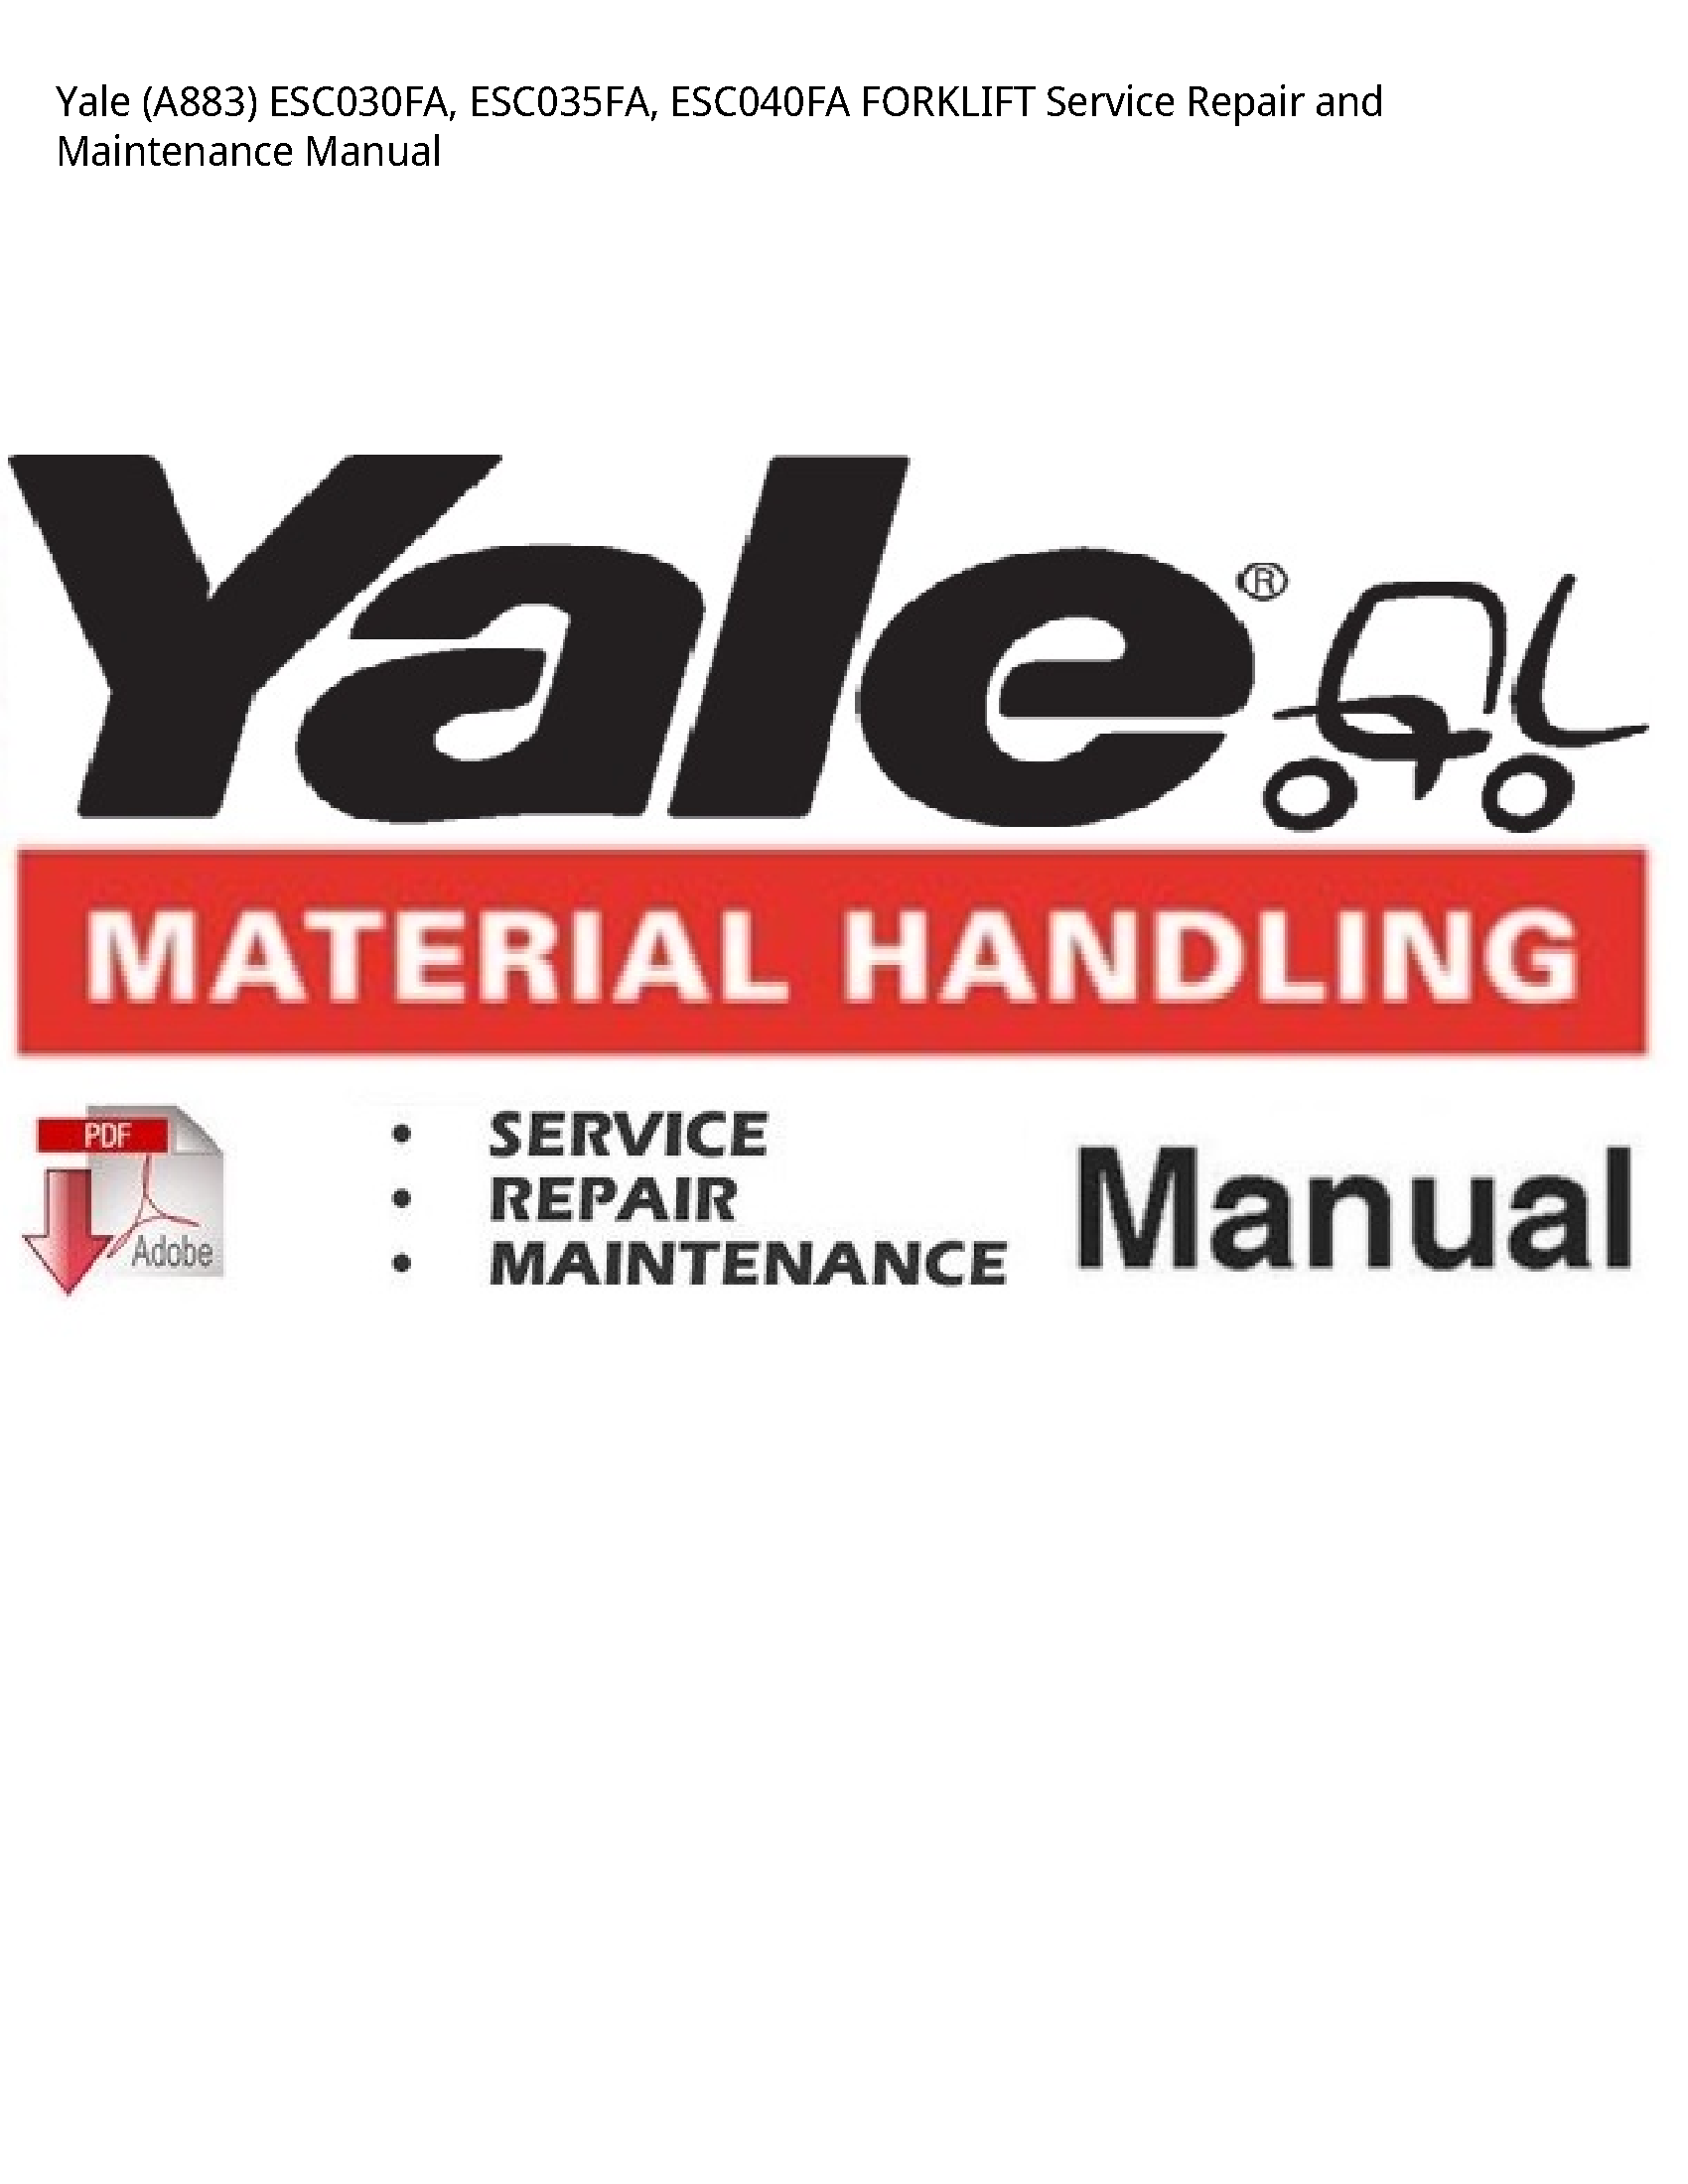 Yale (A883) FORKLIFT manual